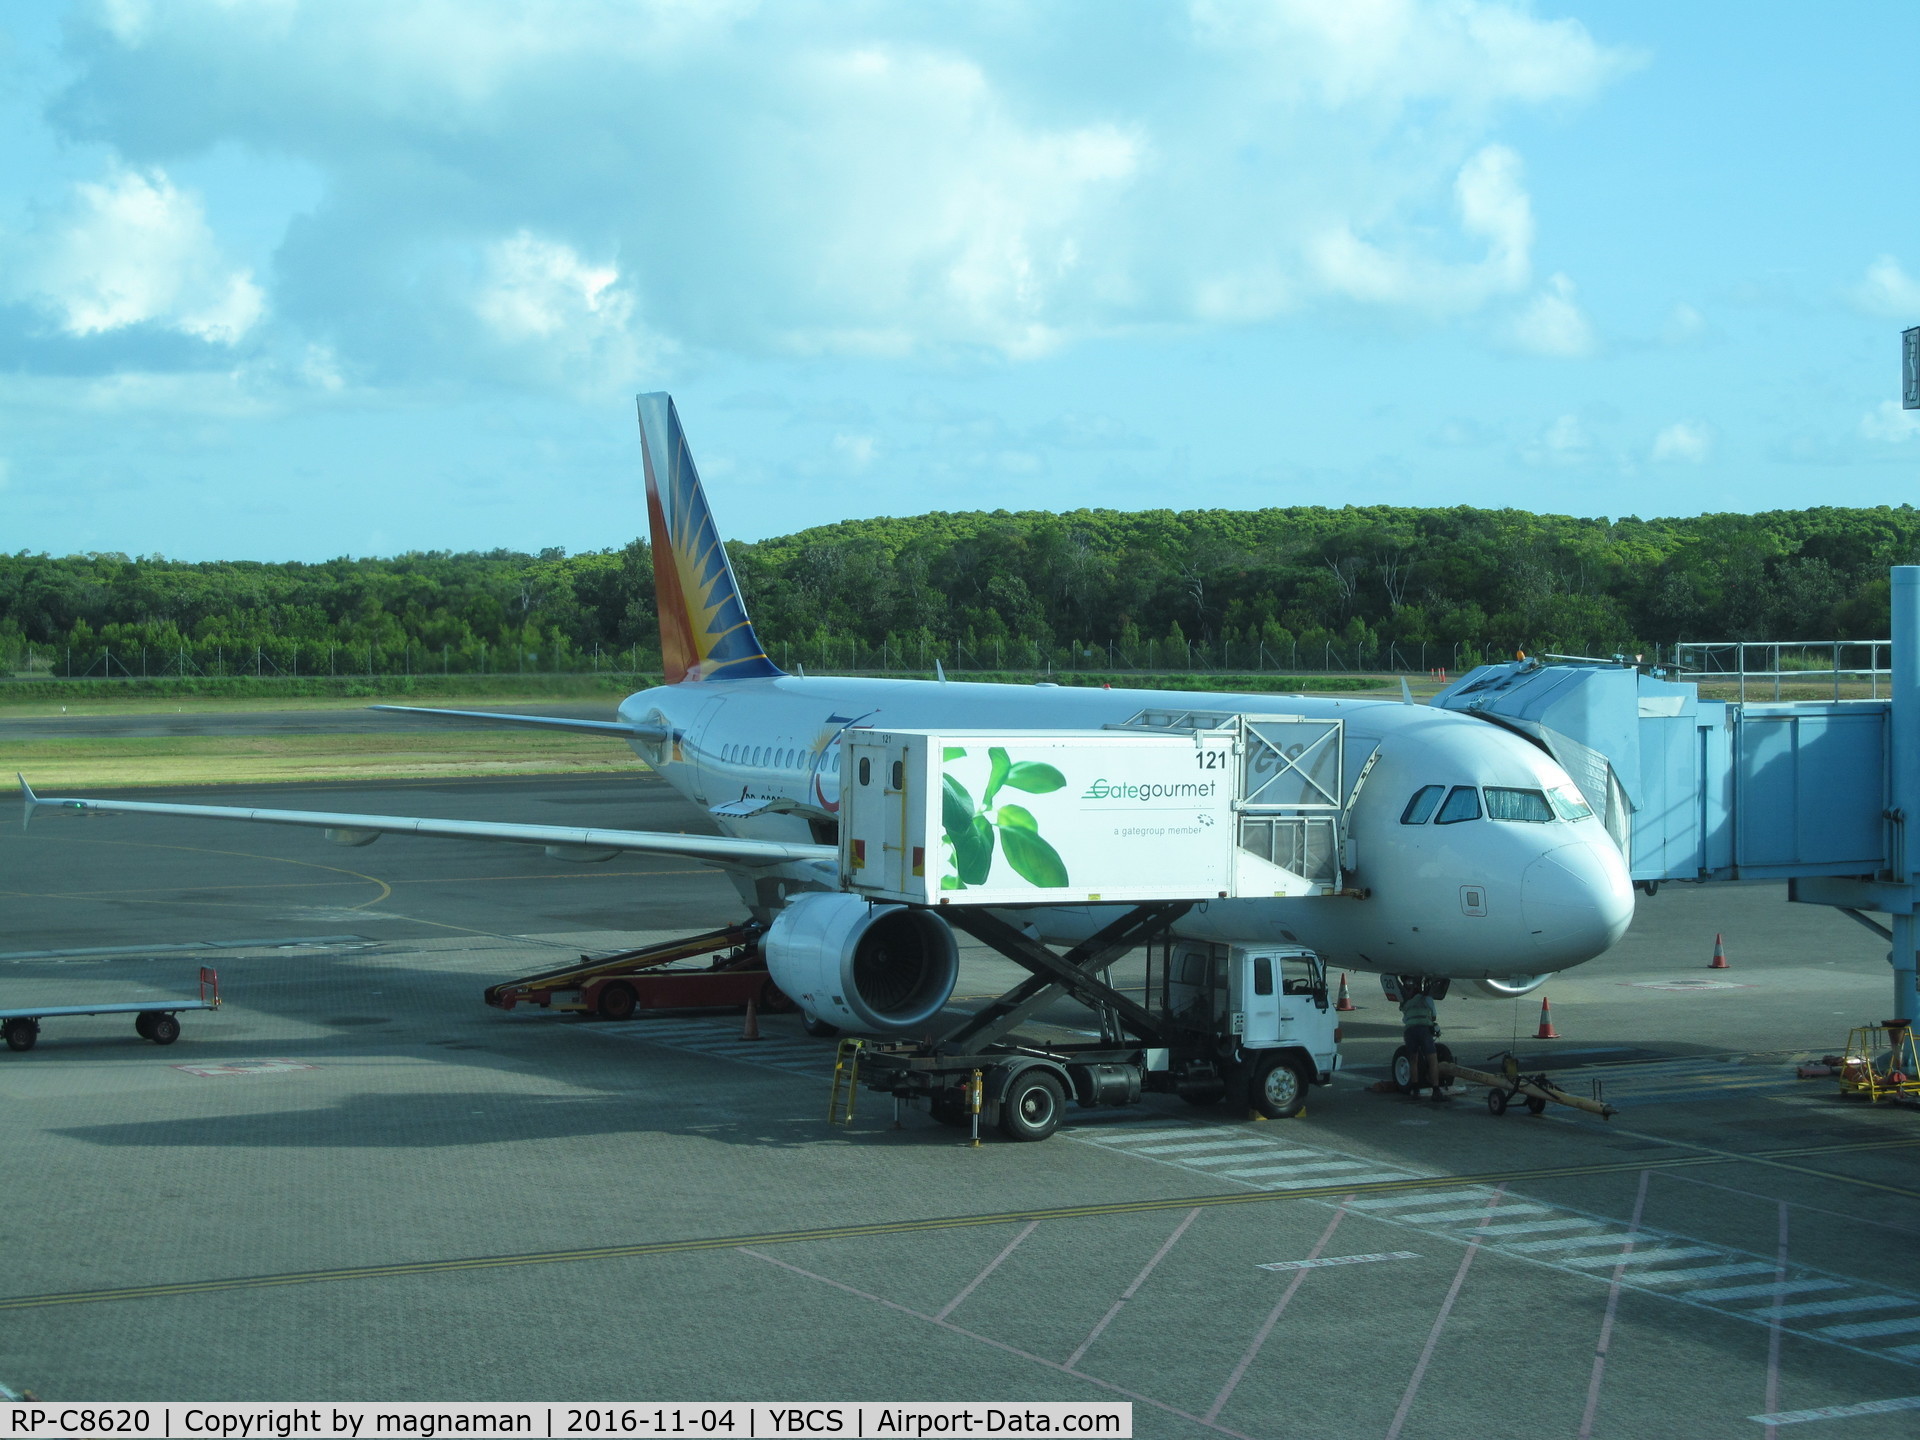 RP-C8620, 2012 Airbus A320-214 C/N 5371, at cairns on stopover en-route to AKL